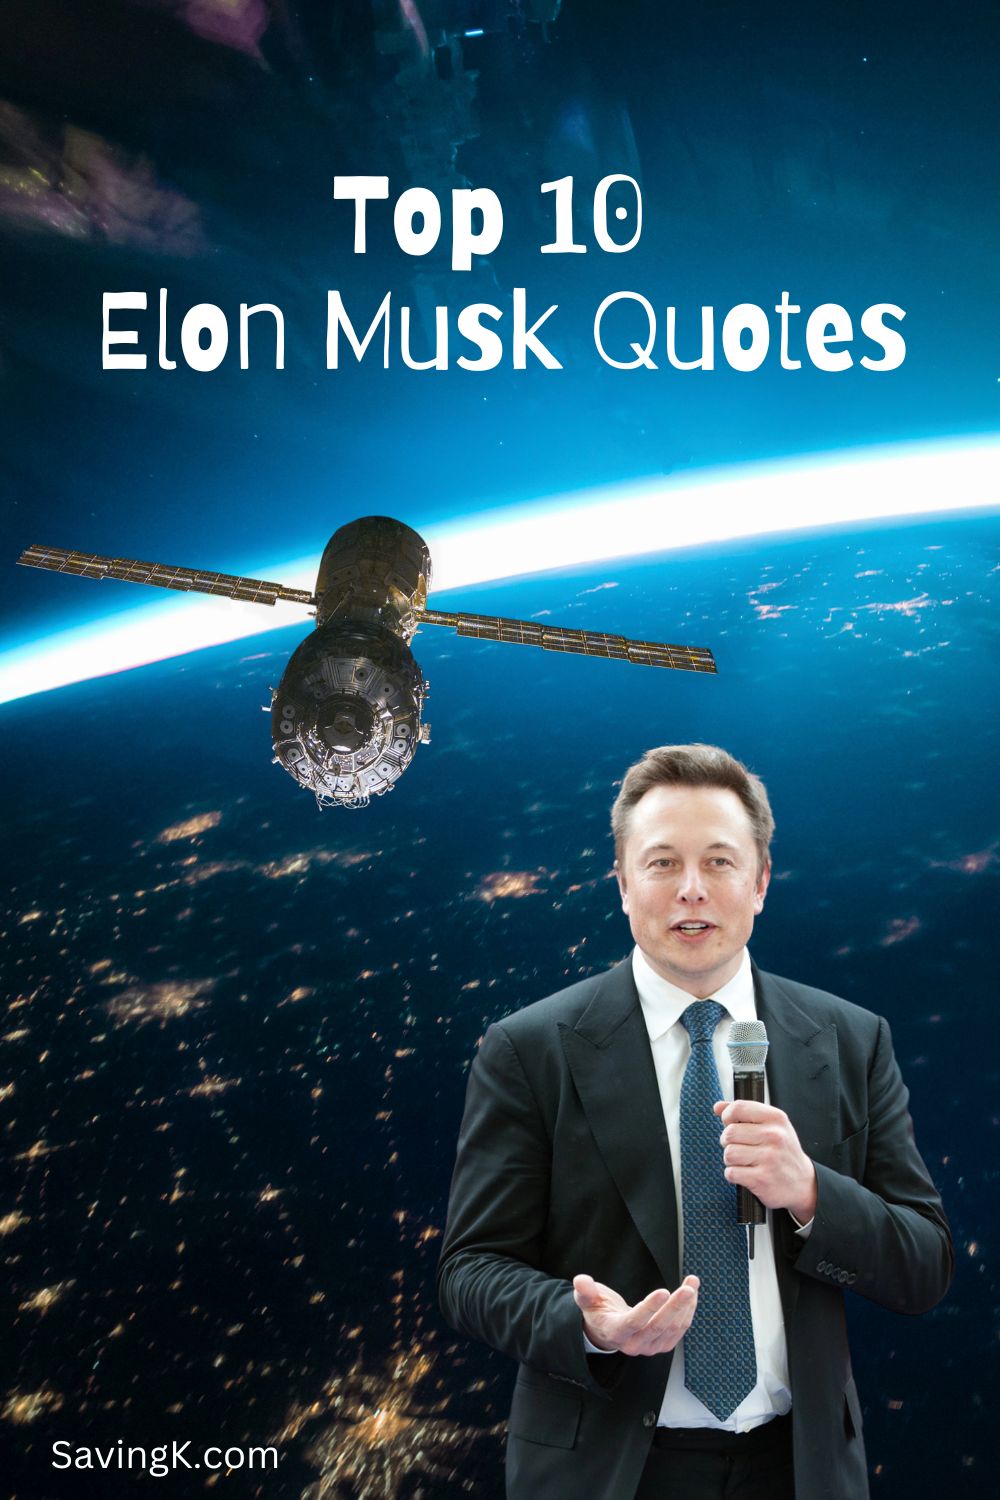 Top 10 Elon Musk Quotes